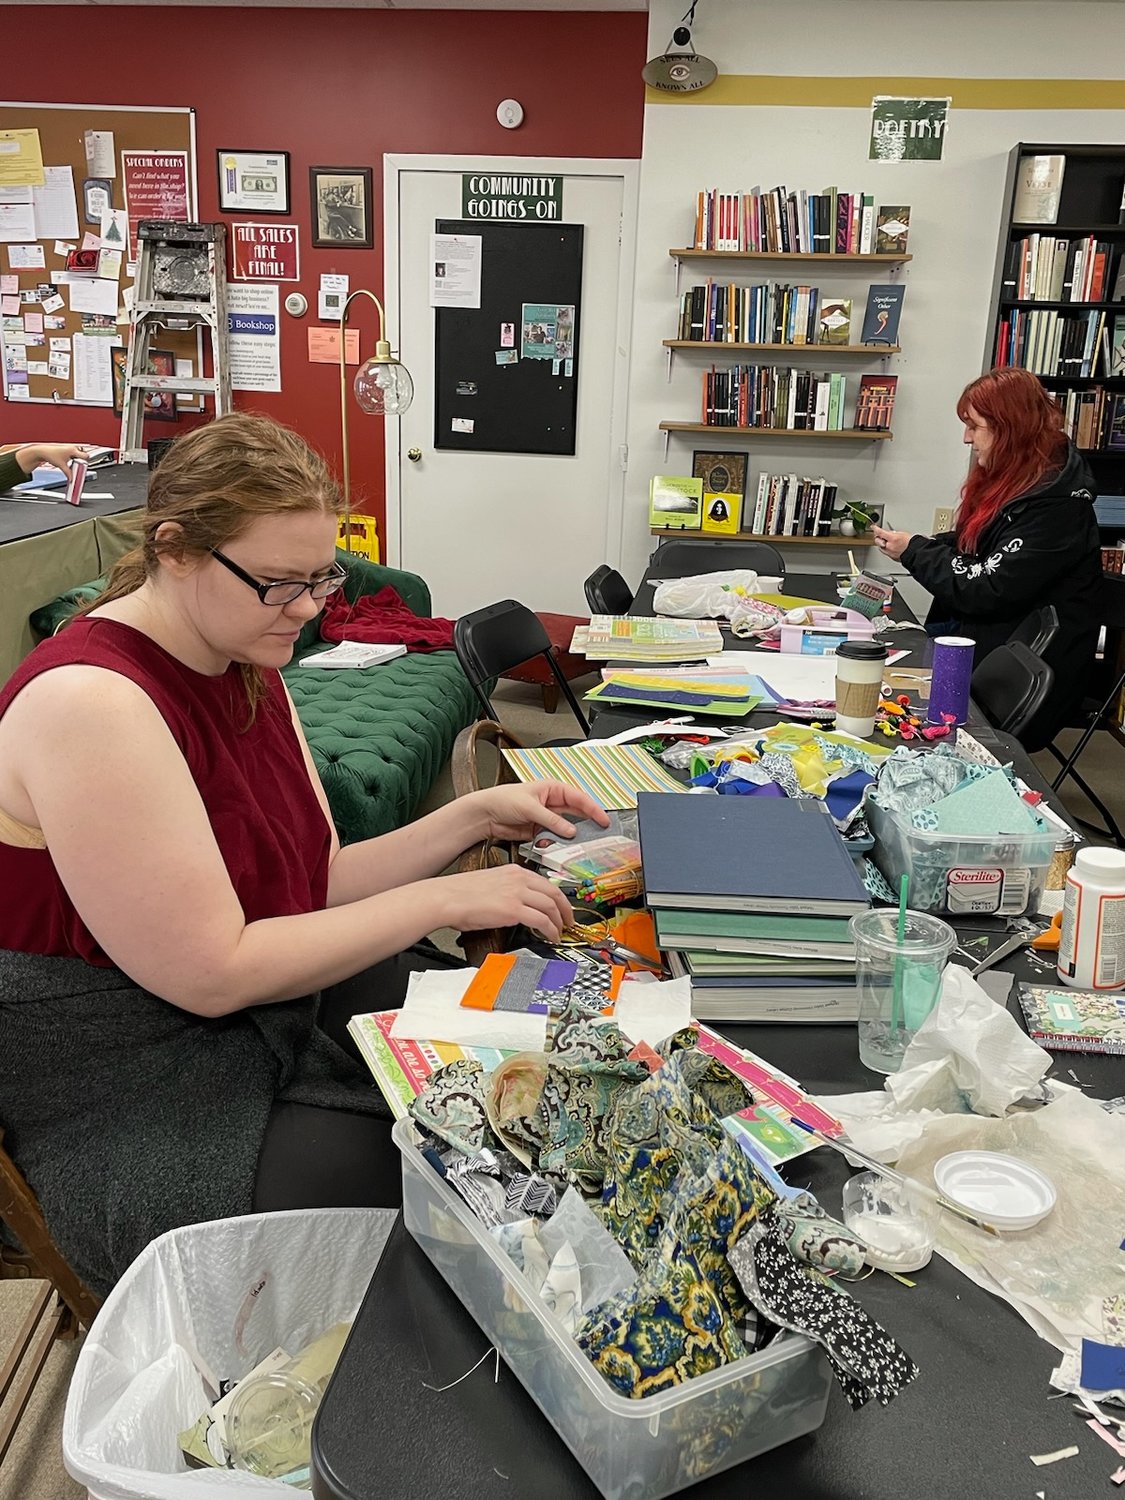 Readers get crafty as they take part in a journal making workshop at Keaton & Lloyd Bookshop, 236 W. Dominick St., in Rome.